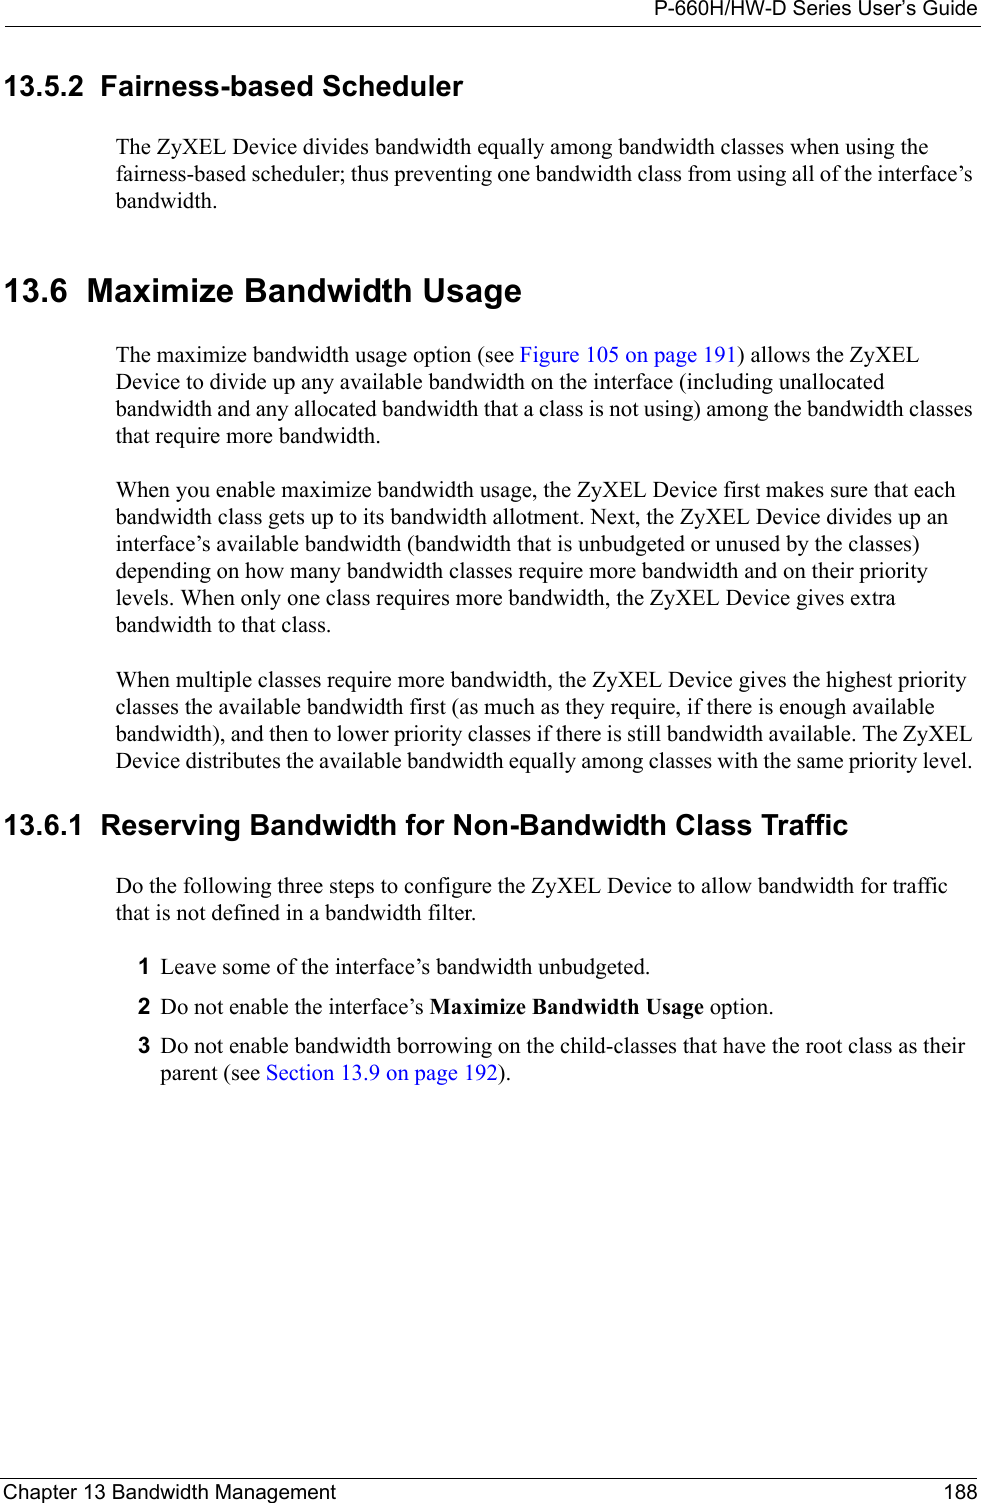 P-660H/HW-D Series User’s GuideChapter 13 Bandwidth Management 18813.5.2  Fairness-based SchedulerThe ZyXEL Device divides bandwidth equally among bandwidth classes when using the fairness-based scheduler; thus preventing one bandwidth class from using all of the interface’s bandwidth. 13.6  Maximize Bandwidth UsageThe maximize bandwidth usage option (see Figure 105 on page 191) allows the ZyXEL Device to divide up any available bandwidth on the interface (including unallocated bandwidth and any allocated bandwidth that a class is not using) among the bandwidth classes that require more bandwidth. When you enable maximize bandwidth usage, the ZyXEL Device first makes sure that each bandwidth class gets up to its bandwidth allotment. Next, the ZyXEL Device divides up an interface’s available bandwidth (bandwidth that is unbudgeted or unused by the classes) depending on how many bandwidth classes require more bandwidth and on their priority levels. When only one class requires more bandwidth, the ZyXEL Device gives extra bandwidth to that class. When multiple classes require more bandwidth, the ZyXEL Device gives the highest priority classes the available bandwidth first (as much as they require, if there is enough available bandwidth), and then to lower priority classes if there is still bandwidth available. The ZyXEL Device distributes the available bandwidth equally among classes with the same priority level. 13.6.1  Reserving Bandwidth for Non-Bandwidth Class TrafficDo the following three steps to configure the ZyXEL Device to allow bandwidth for traffic that is not defined in a bandwidth filter.1Leave some of the interface’s bandwidth unbudgeted.2Do not enable the interface’s Maximize Bandwidth Usage option.3Do not enable bandwidth borrowing on the child-classes that have the root class as their parent (see Section 13.9 on page 192).